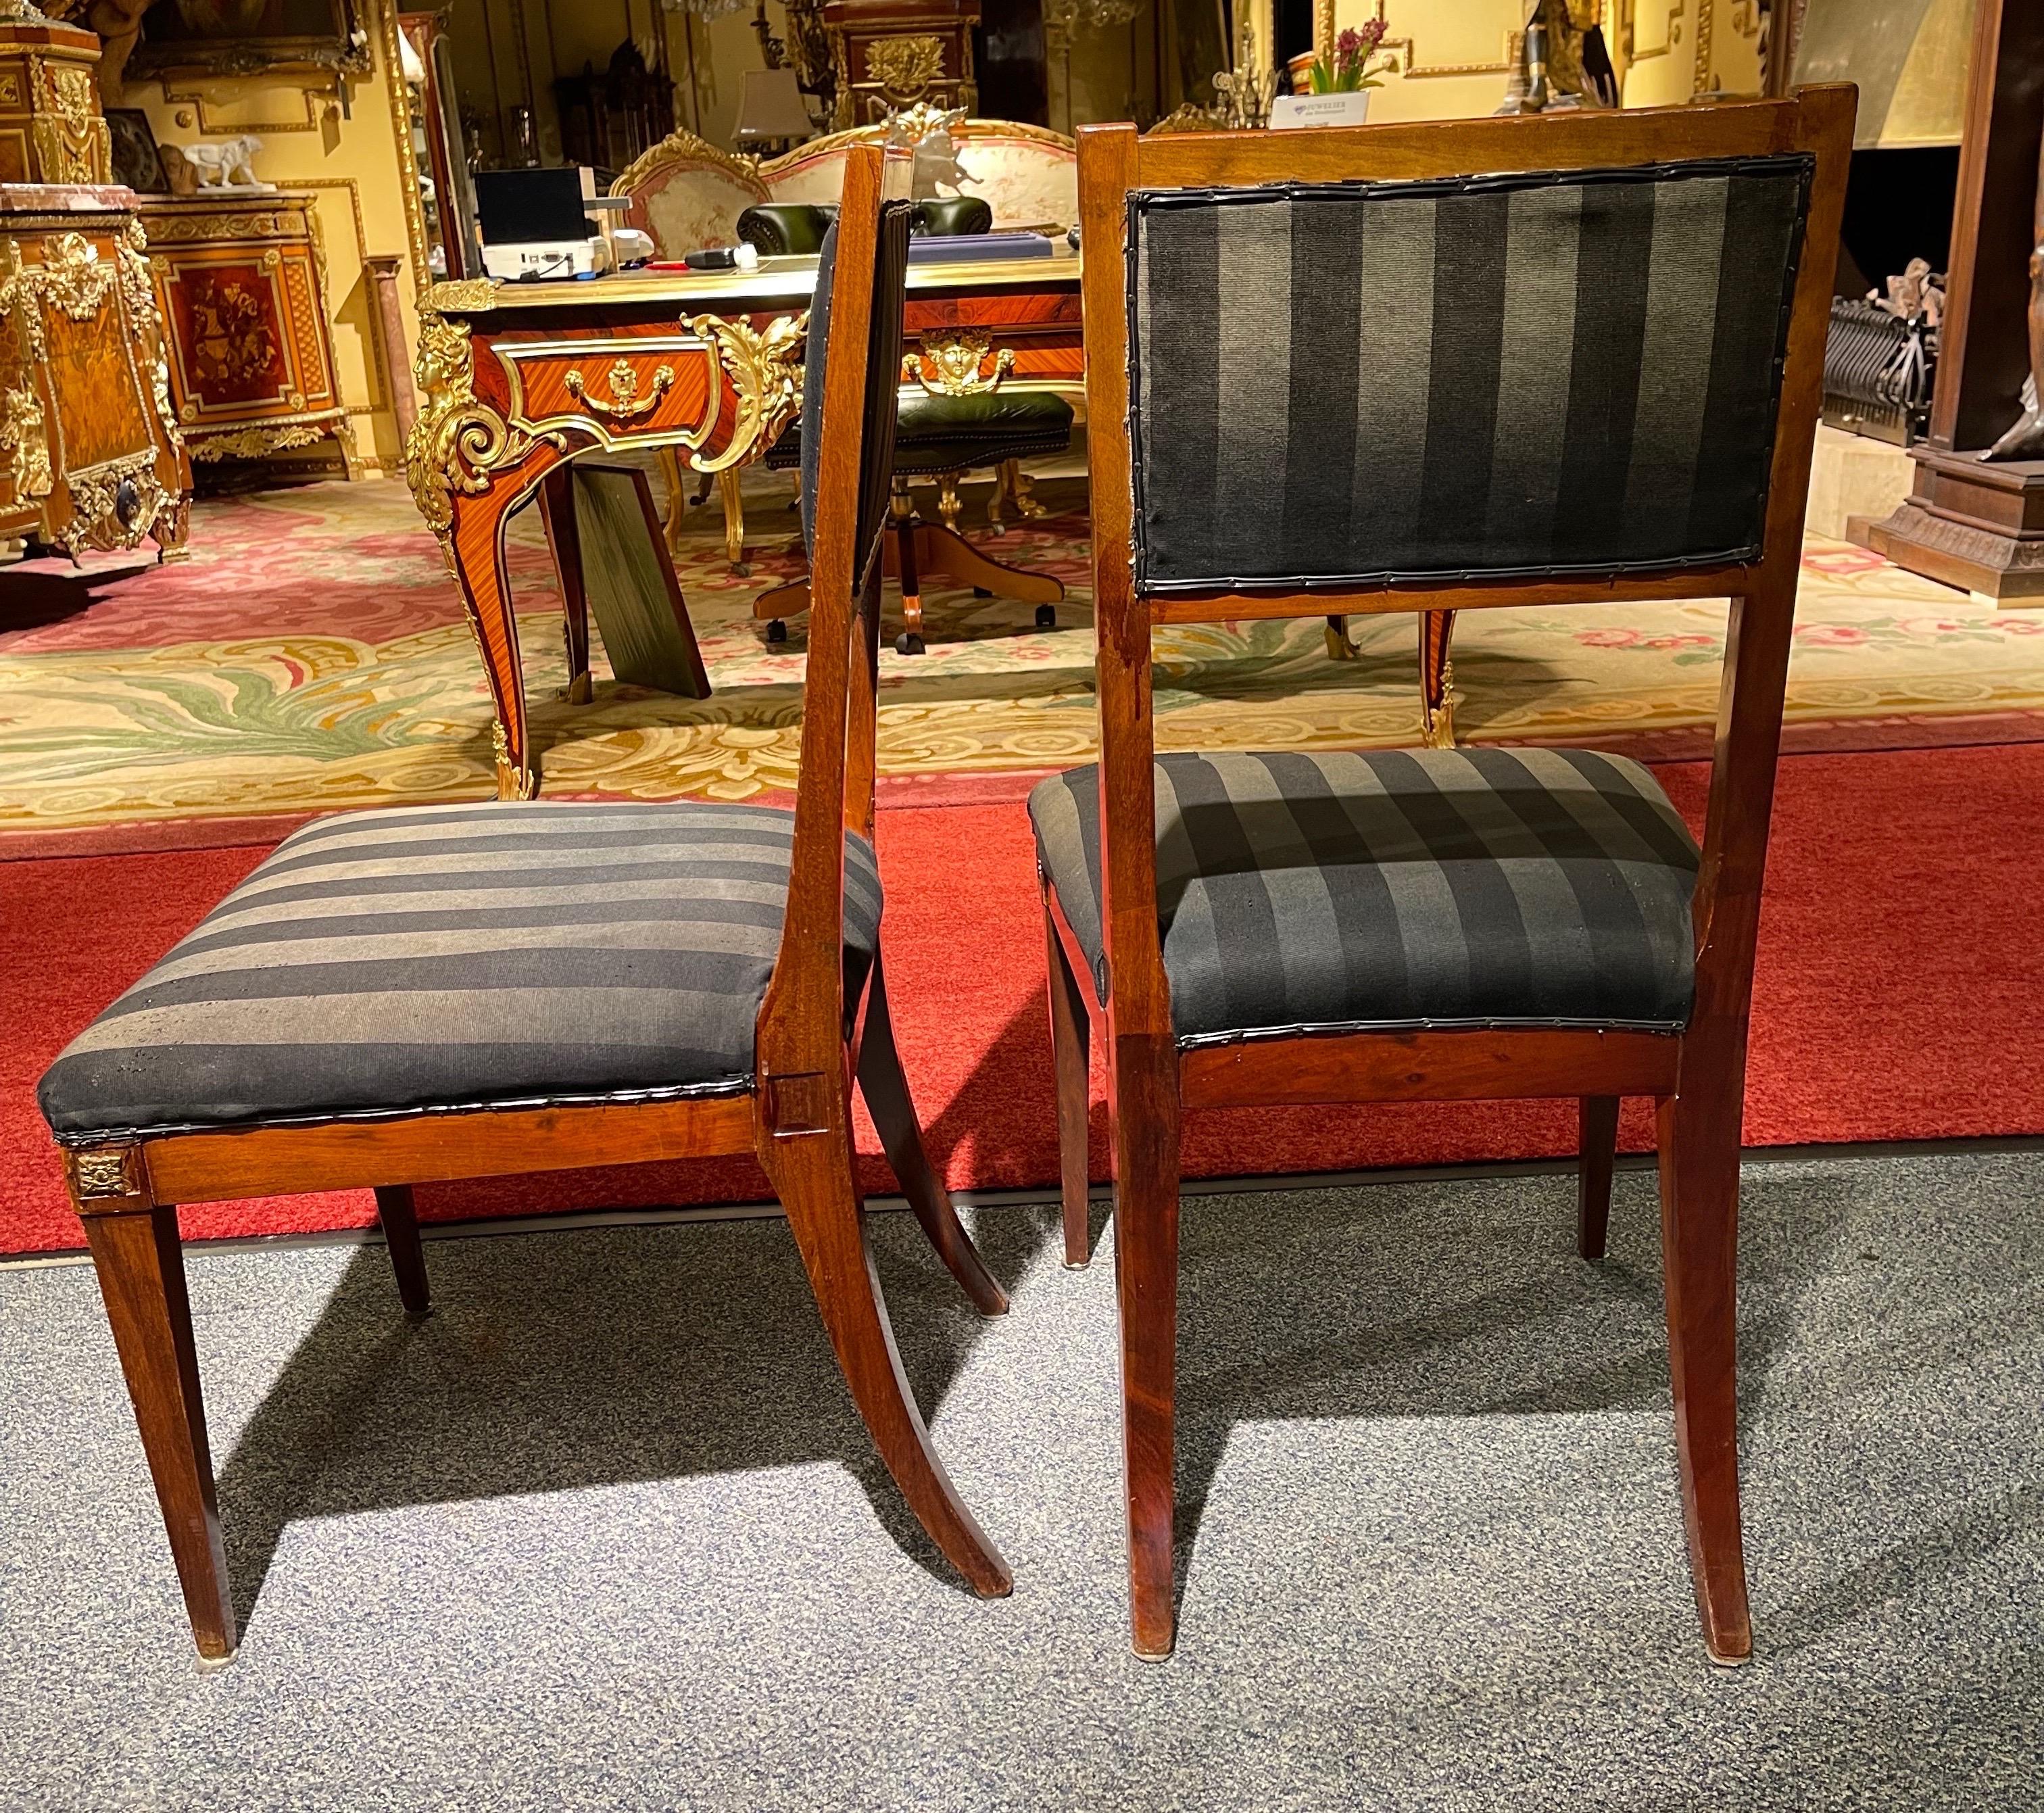 Pair (2) Empire chairs, around 1900

Solid wood mahogany. Upholstered seat and backrest covered with black fabric. Very stable and robust built. Hind legs in classic Empire saber shape. Timeless and classic design.